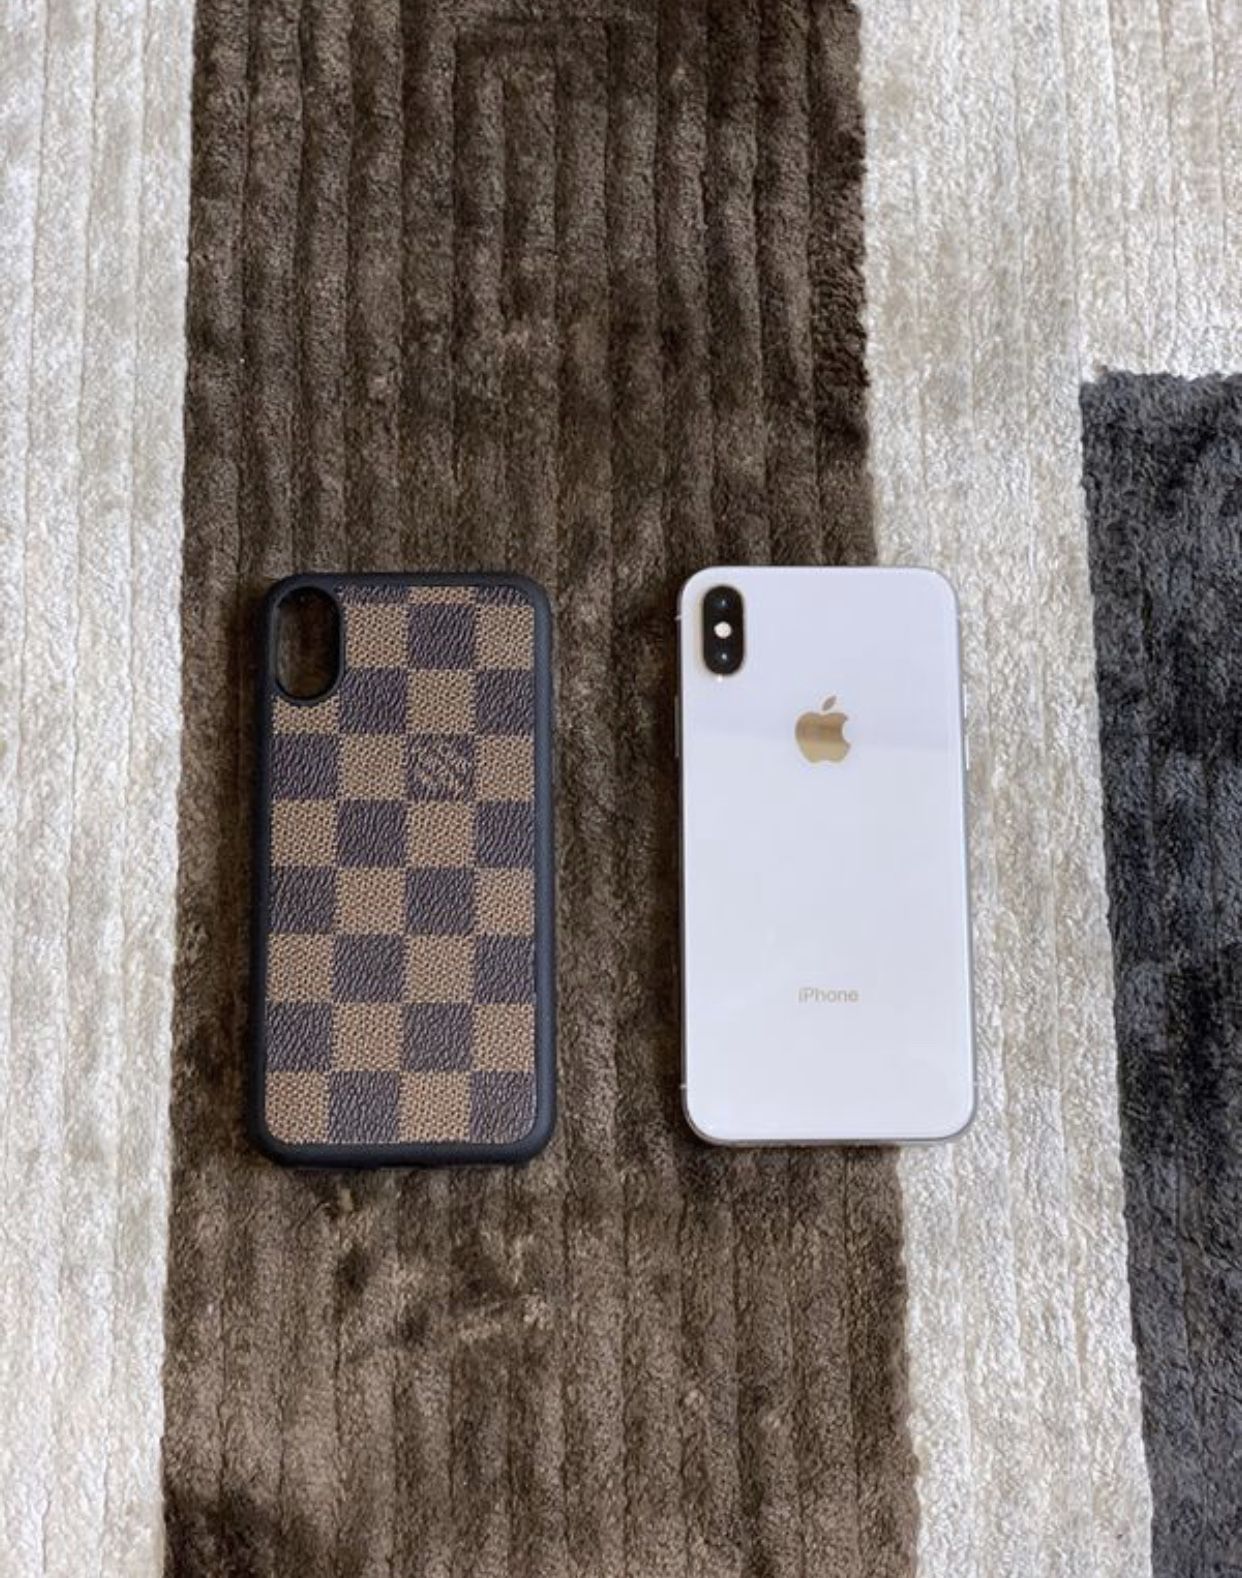 Louis Vuitton iPhone 13 Pro Max Case for Sale in New York, NY - OfferUp